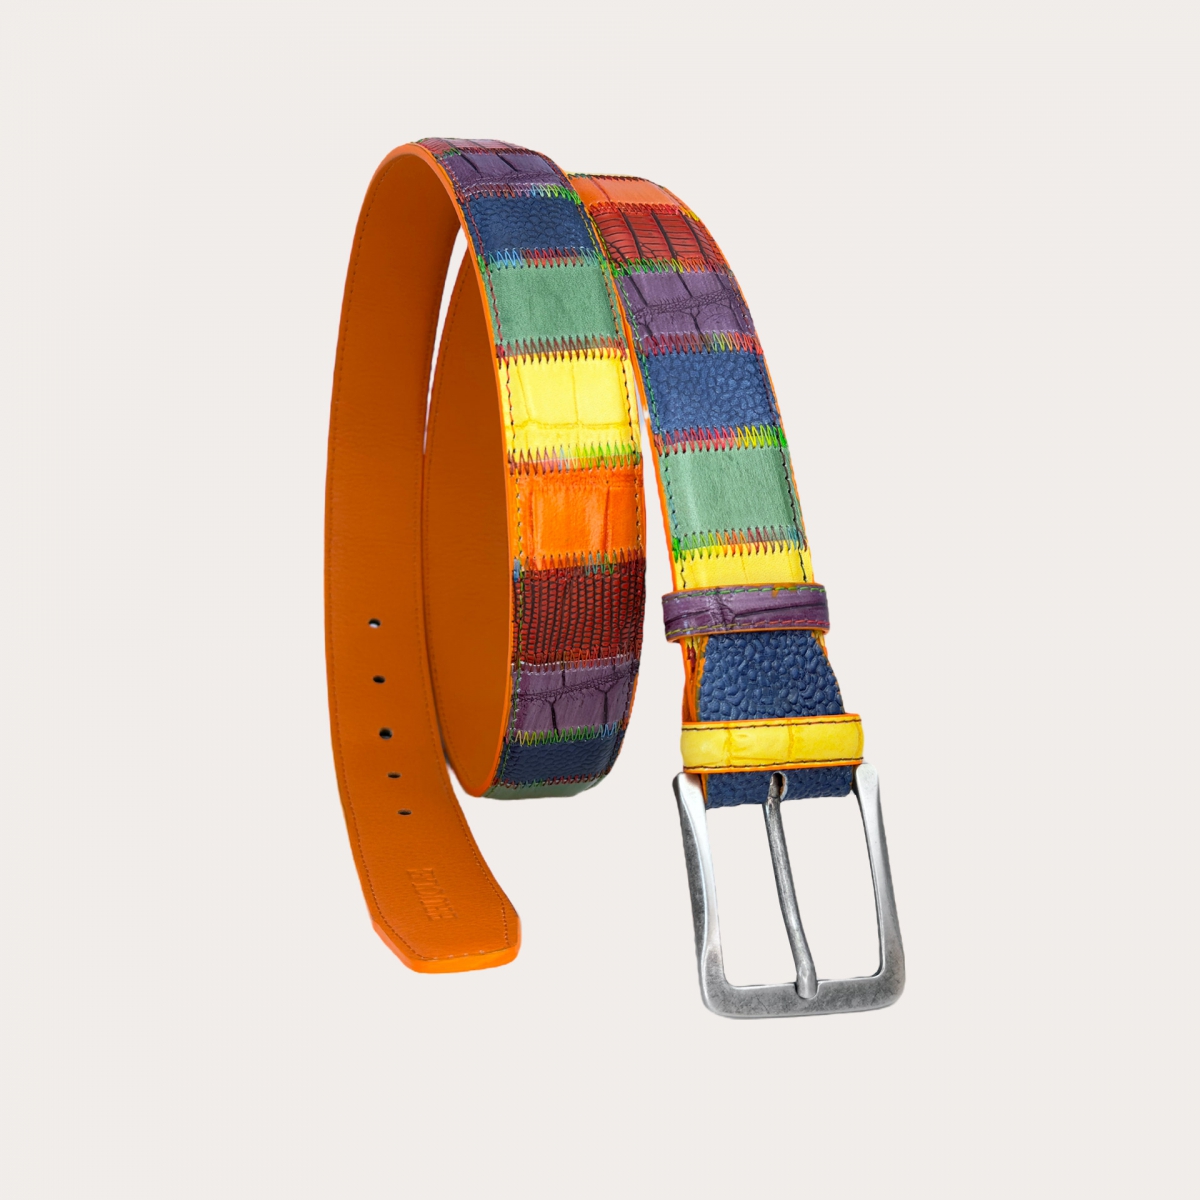 Multicolored rainbow patchwork belt in hand-colored leather